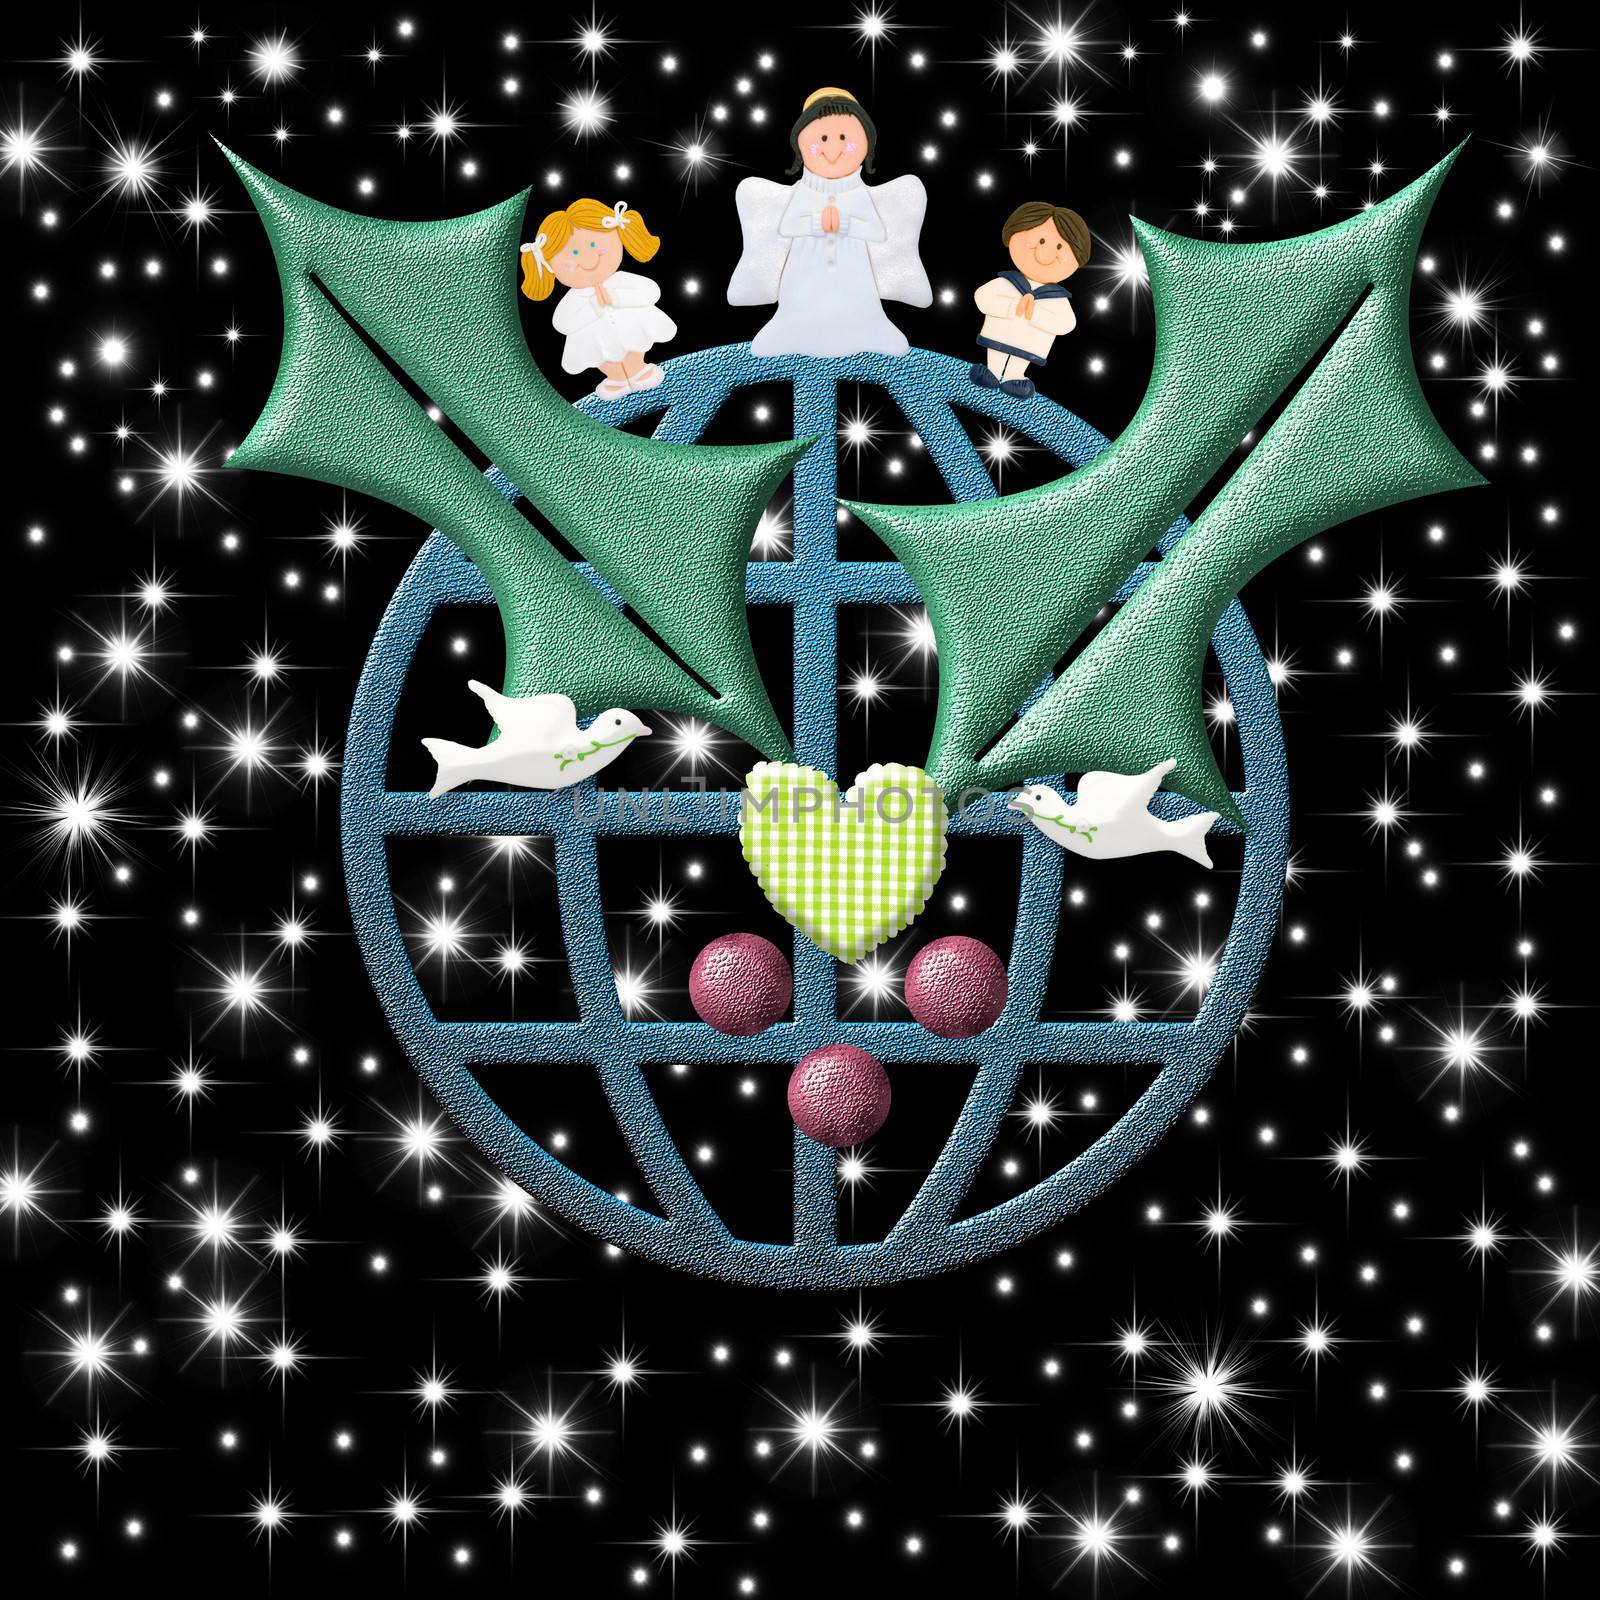 Christmas card,  earth with peace symbols Christmas Angel and children smiling, peace doves, holly and heart in starry night